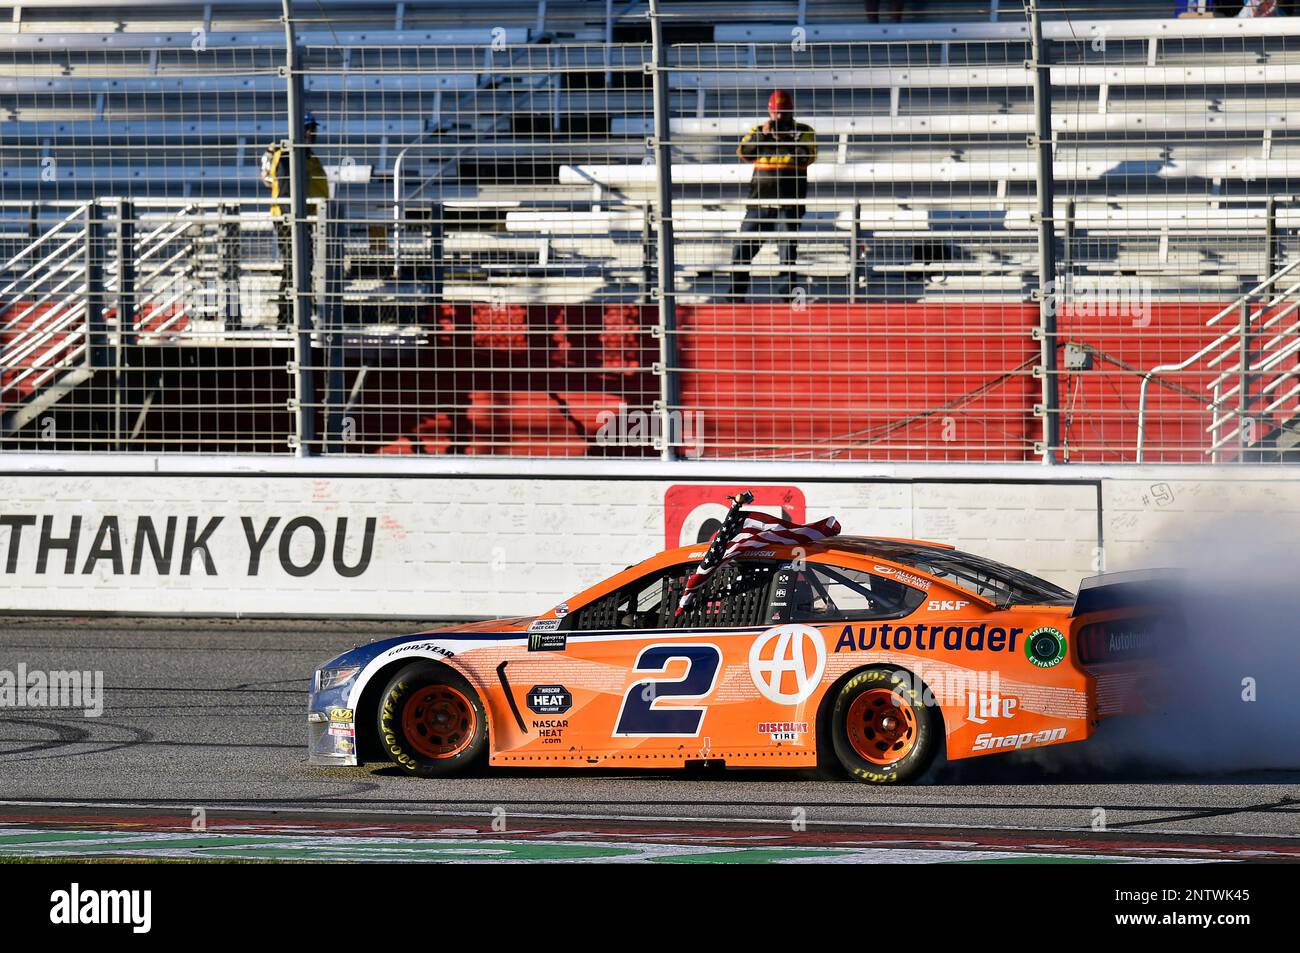 2 Brad Keselowski, Team Penske, Ford Mustang celebrates his win during the NASCAR Monster Energy Cup Series race Folds of Honor QuikTrip 500 Race at Atlanta Motor Speedway, Sunday, February 24, 2019,